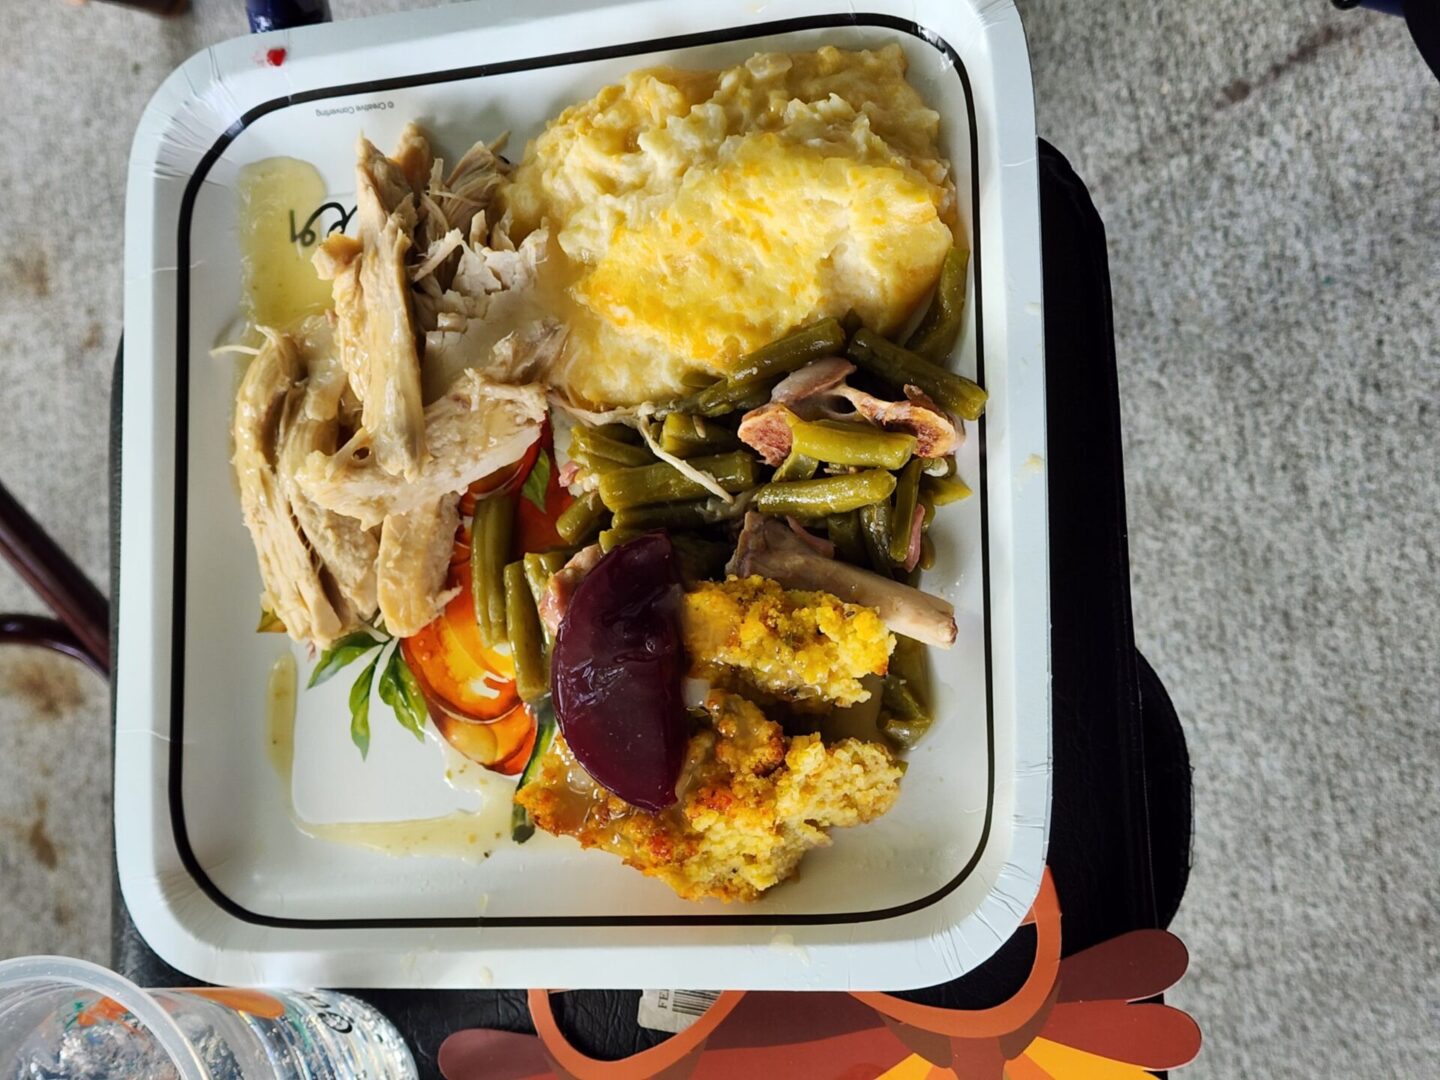 A plate with chicken, stuffing, and vegetables